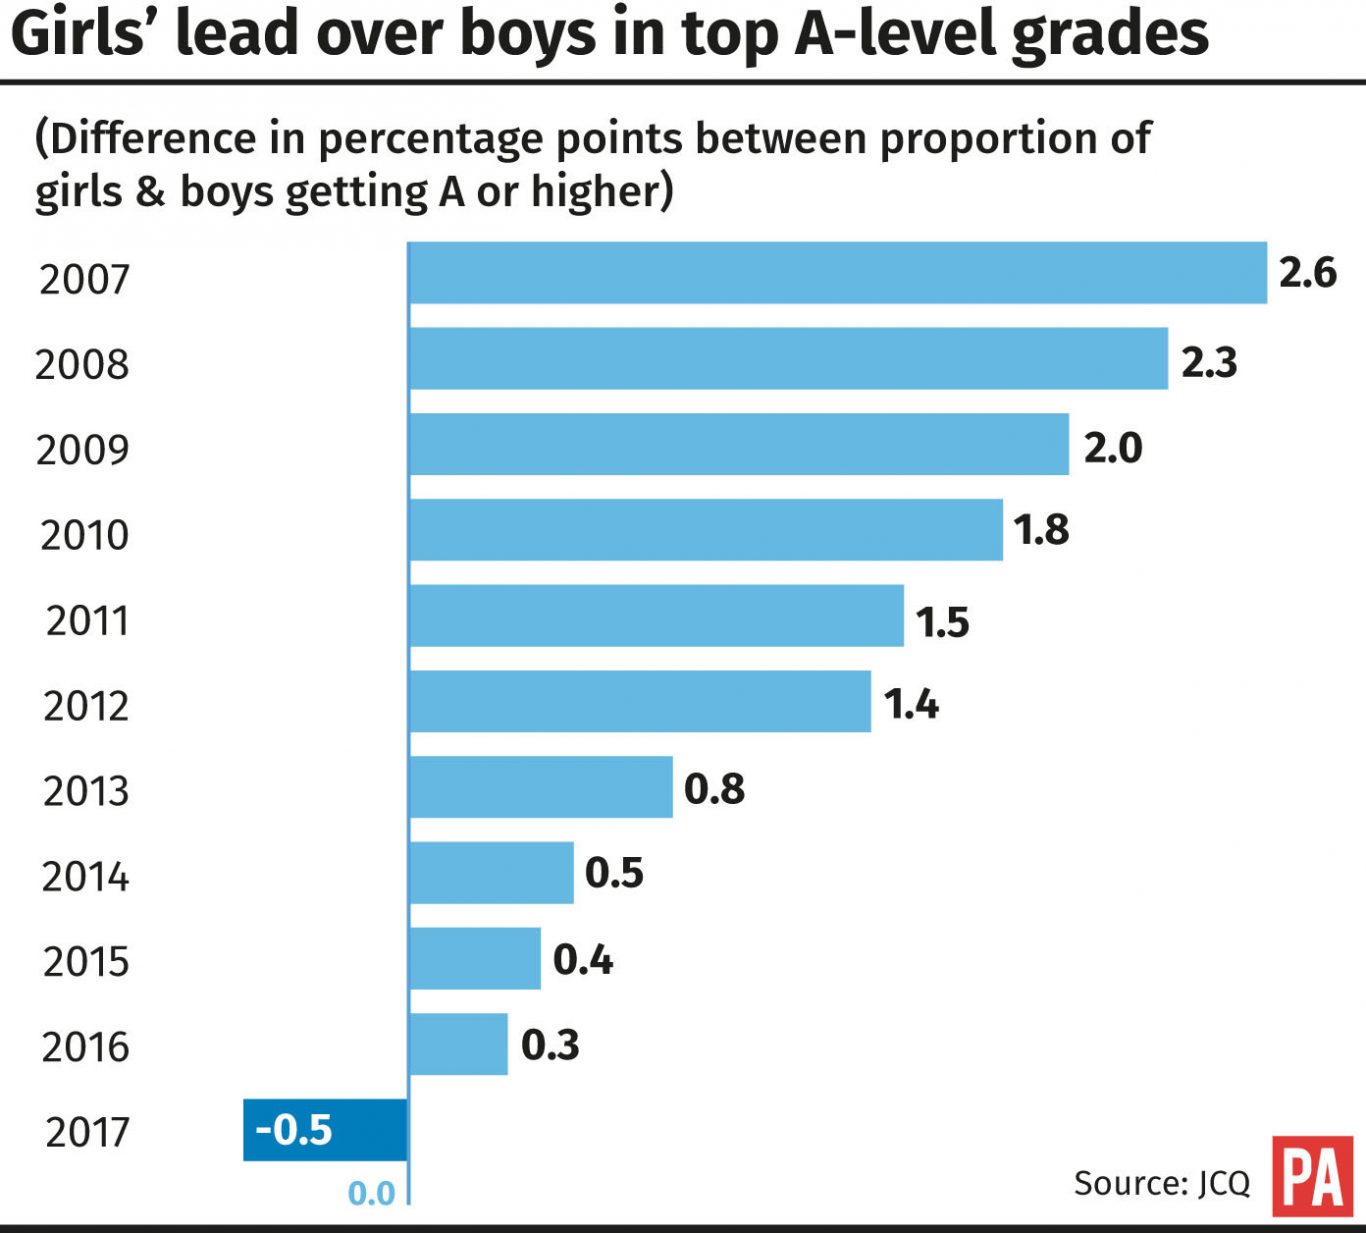 Girls' lead over boys in top A-level grades